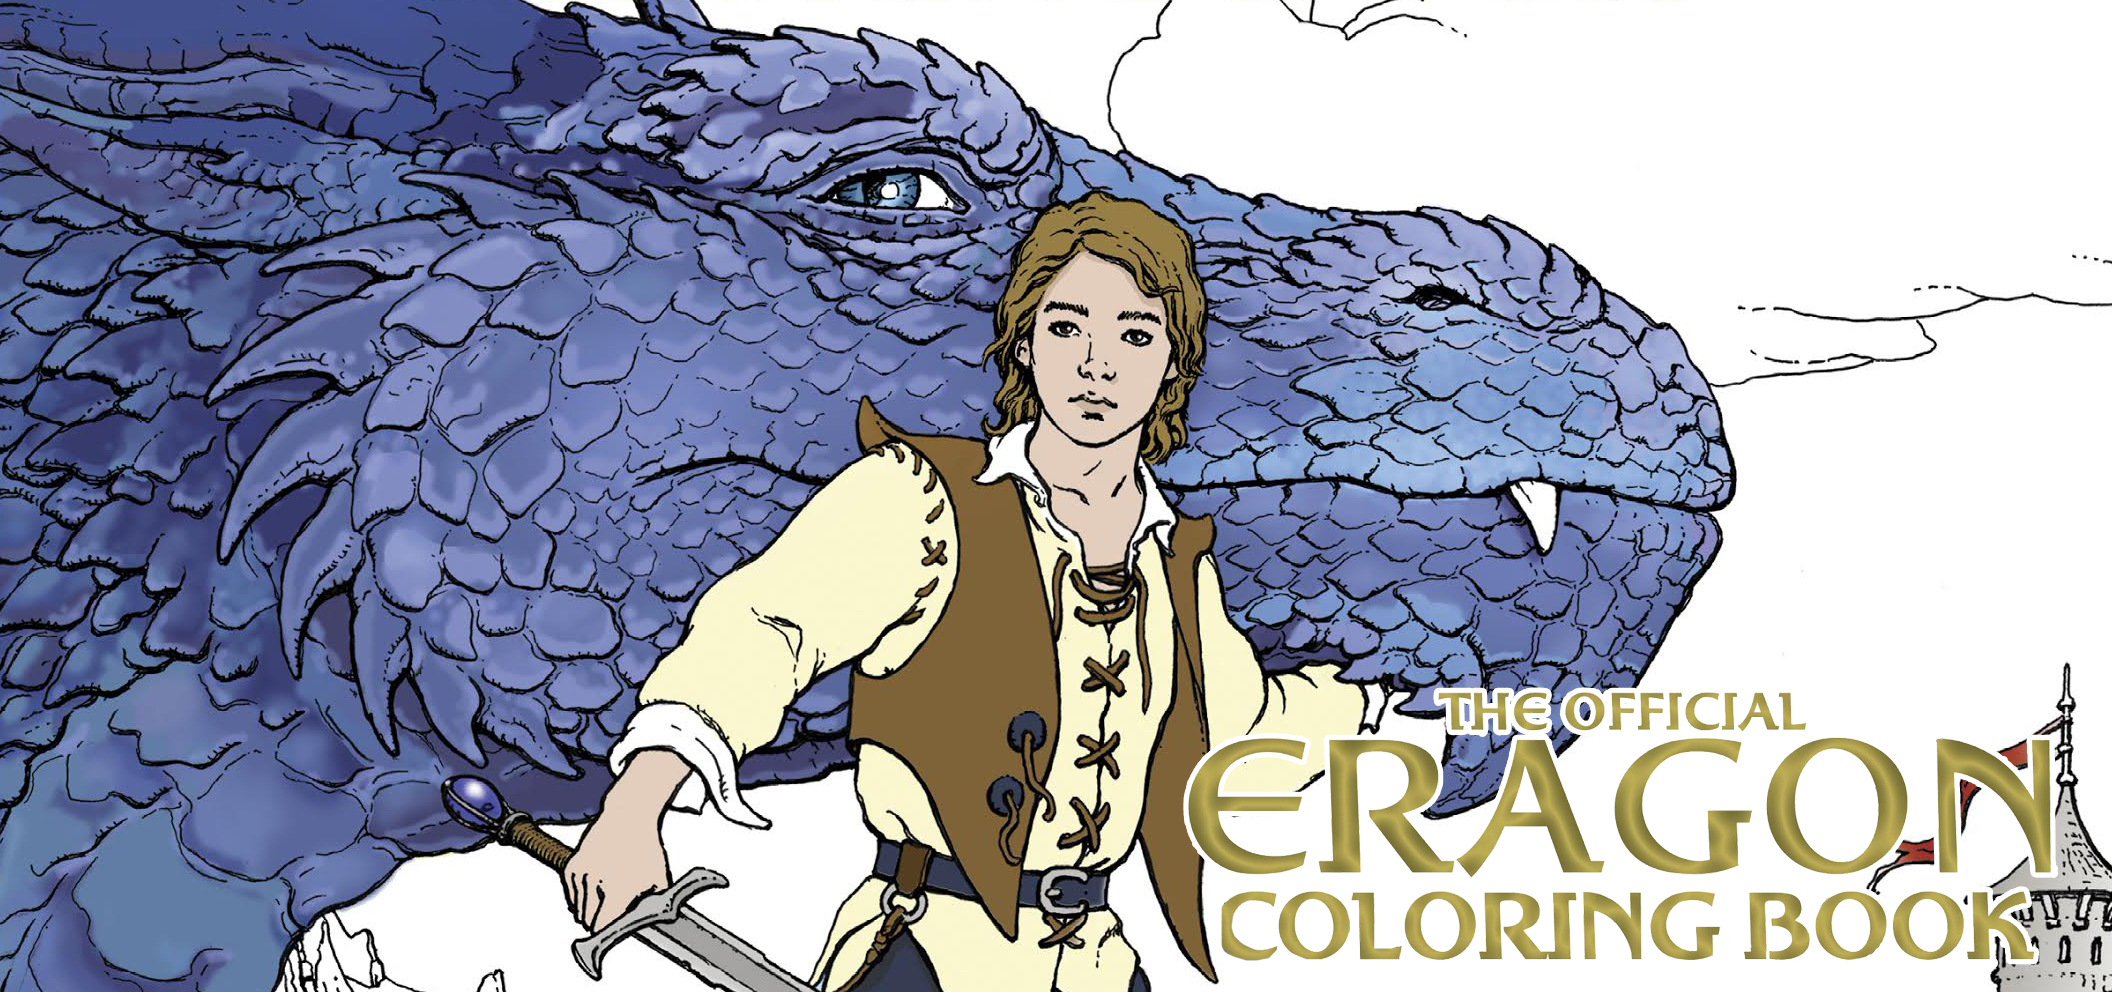 Everything we know about the Official Eragon Coloring book and its illustrator, Ciruelo!